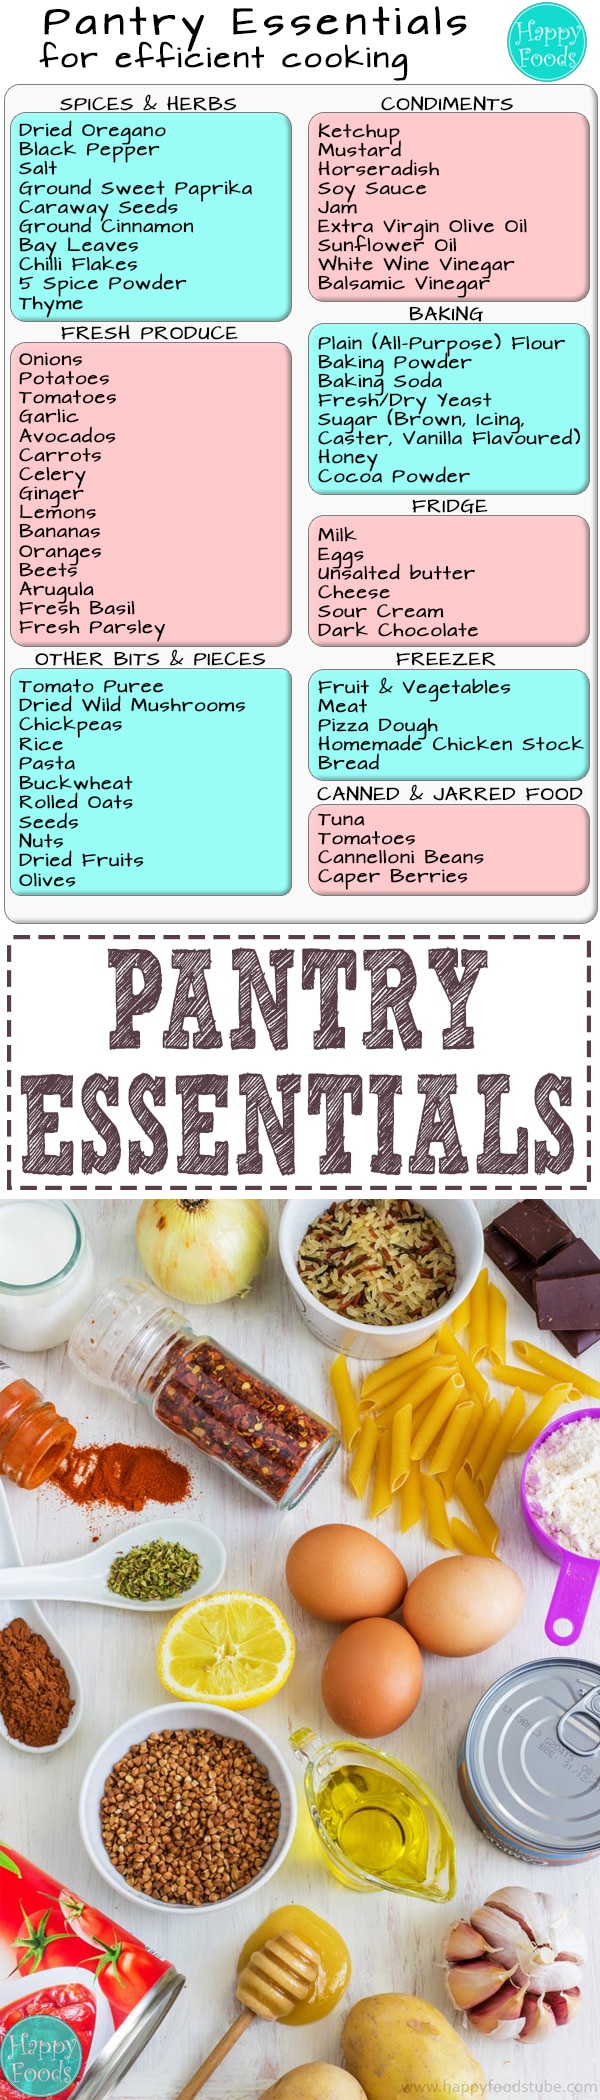 My Pantry Essentials - Those ingredients that help us create delicious dishes whether they are cooked, baked or just thrown together in a matter of seconds. Did you know that a well-stocked pantry is the key to efficient cooking? | happyfoodstube.com